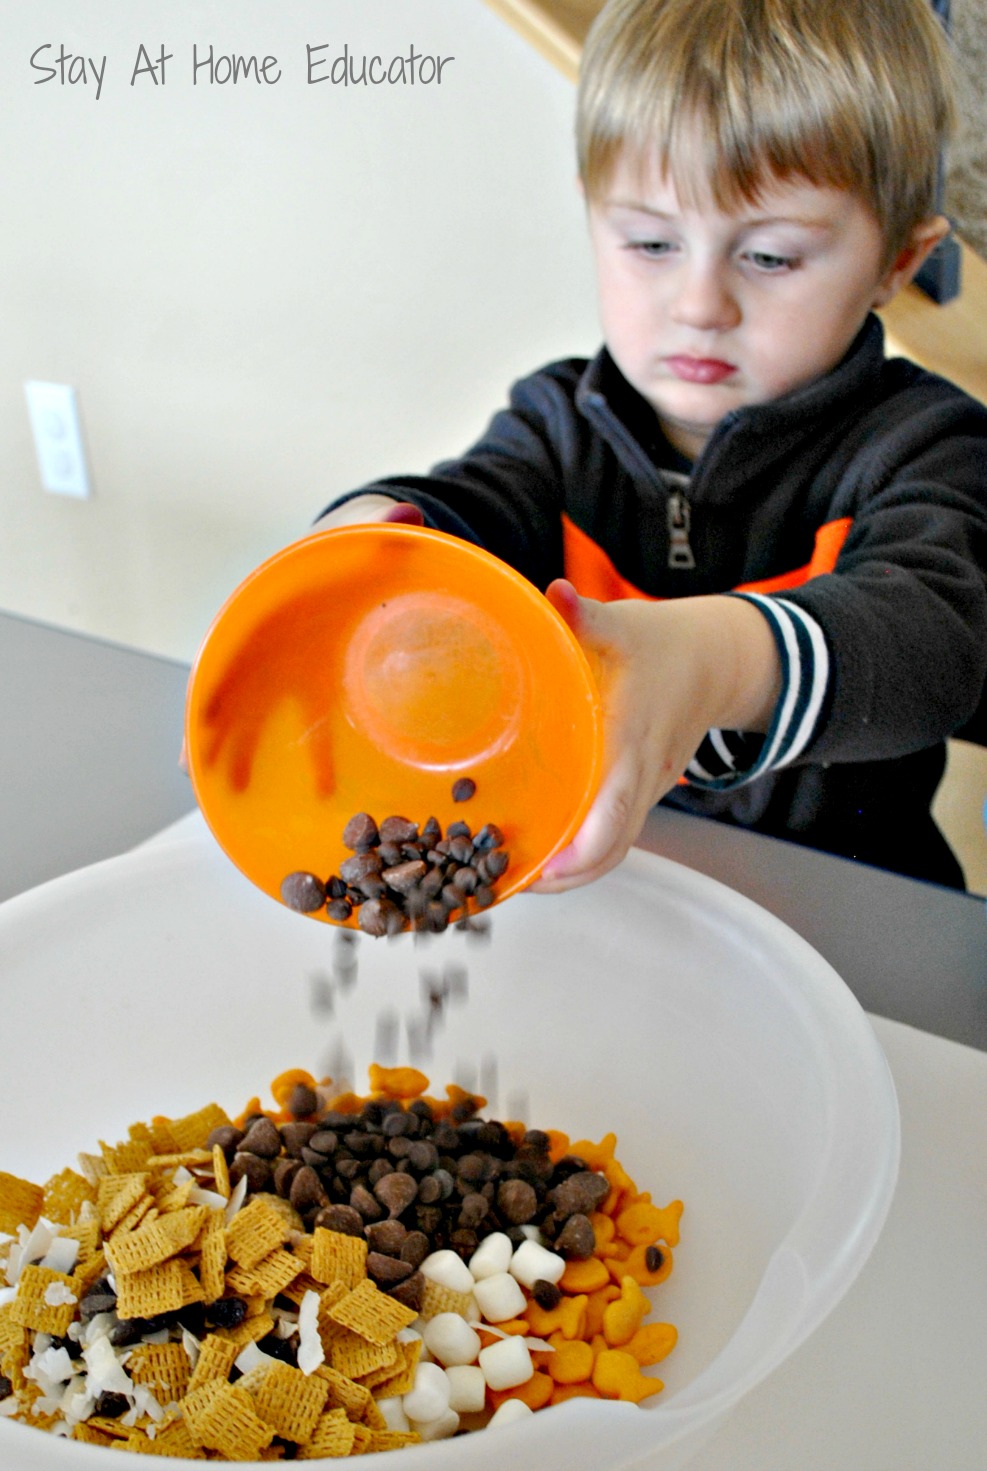 Sharing trail mix filler as first Thanksgiving preschool snack - Stay At Home Educator